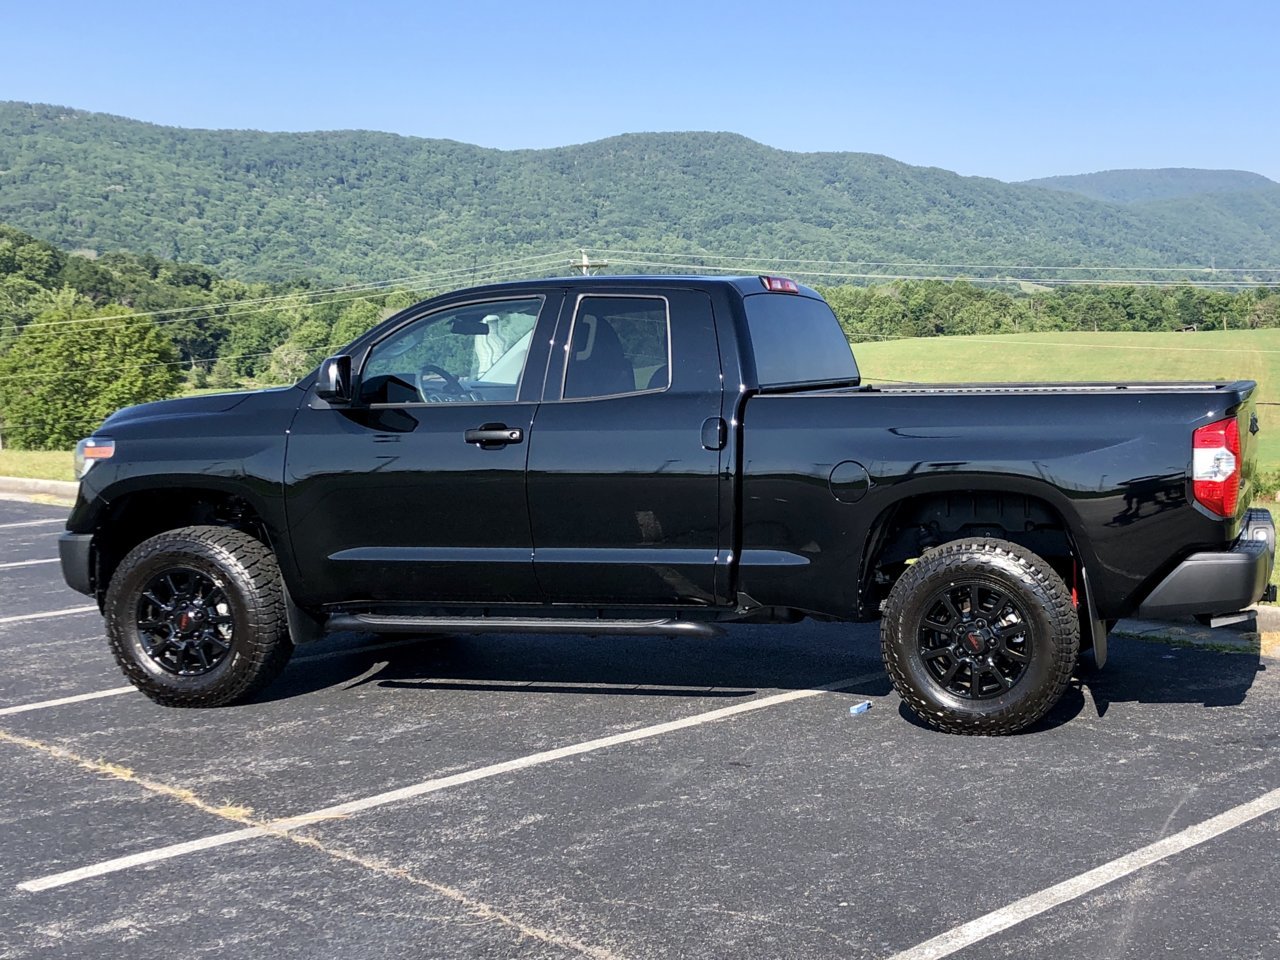 So which wheels look better? | Toyota Tundra Forum